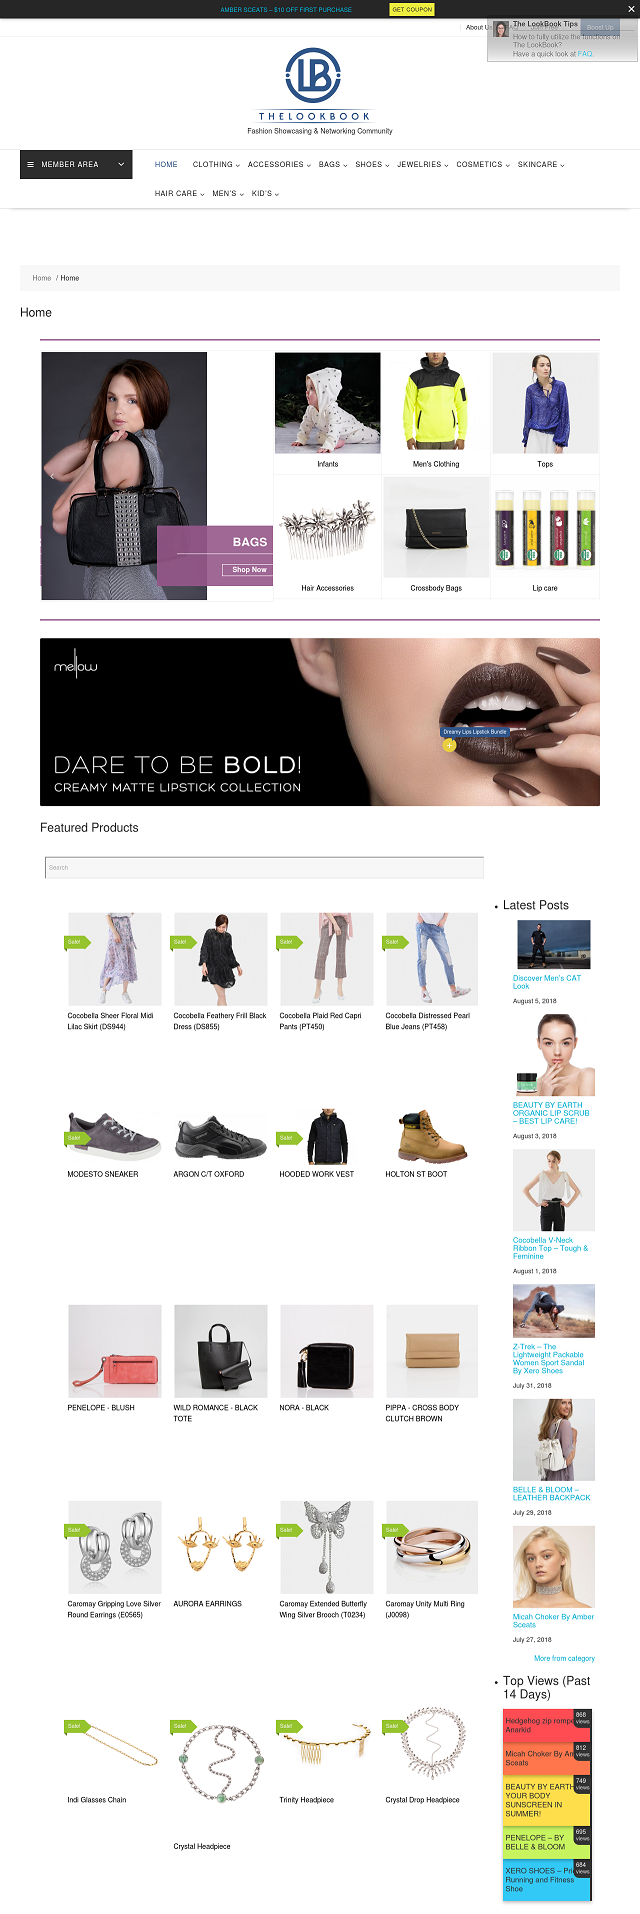 upload 20 products to showcase on The LookBook with 2 extra free boost-up posts